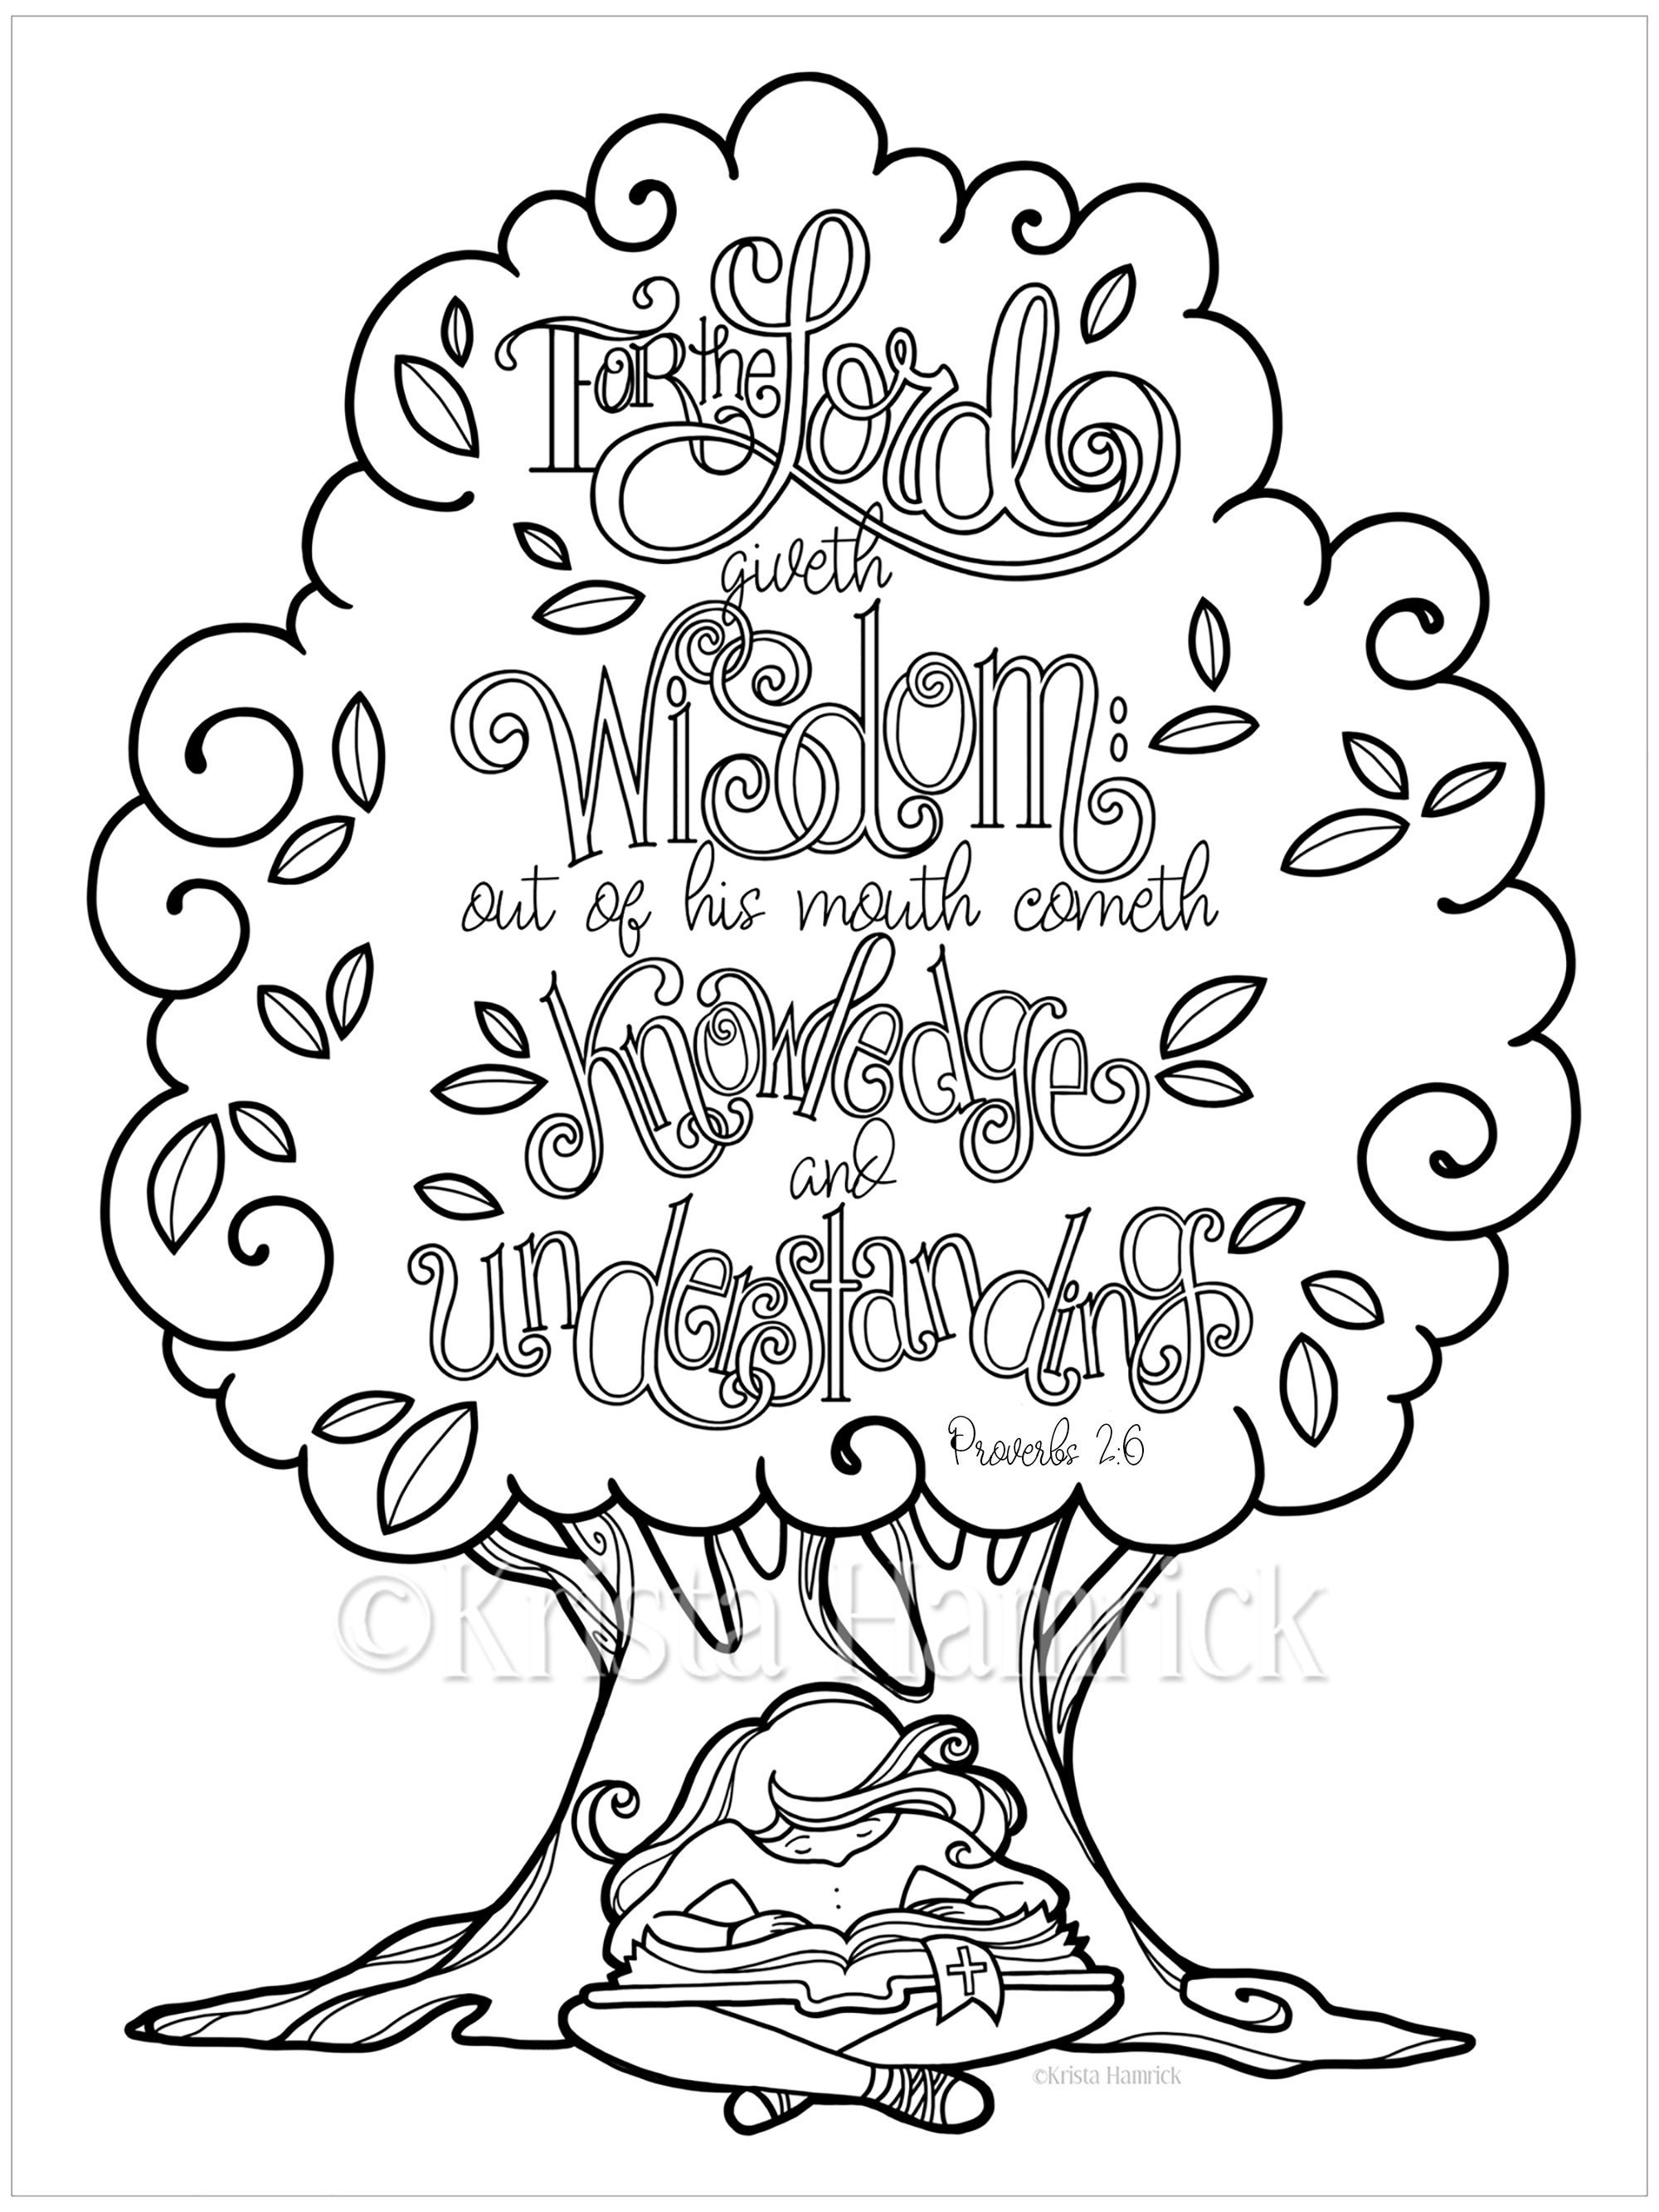 Wisdom/Proverbs 2:6 coloring page in two sizes_ 8.5X11 Bible | Etsy